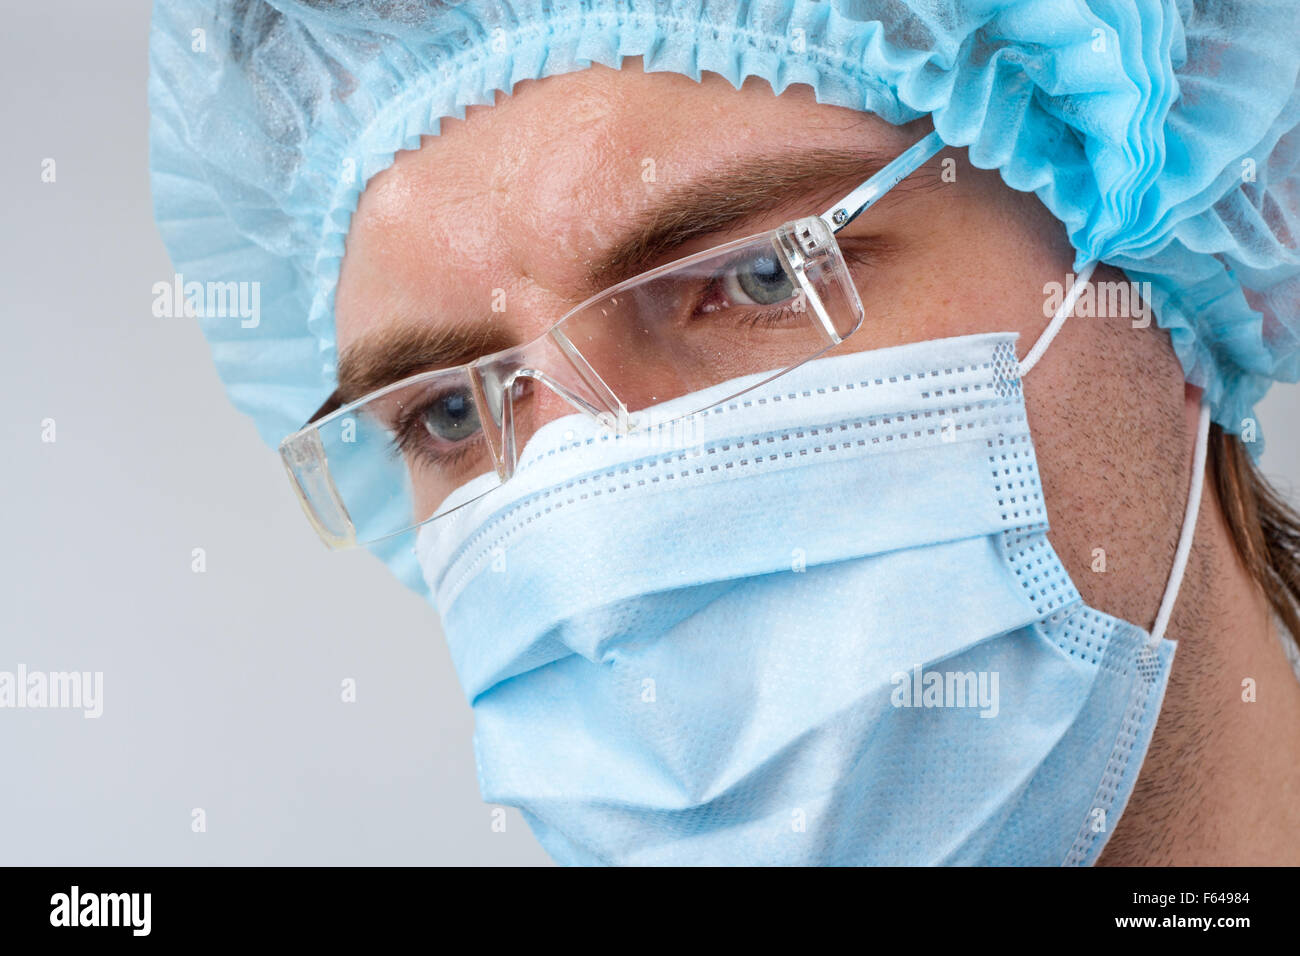 Portrait of sweat serious surgeon in surgical mask Stock Photo